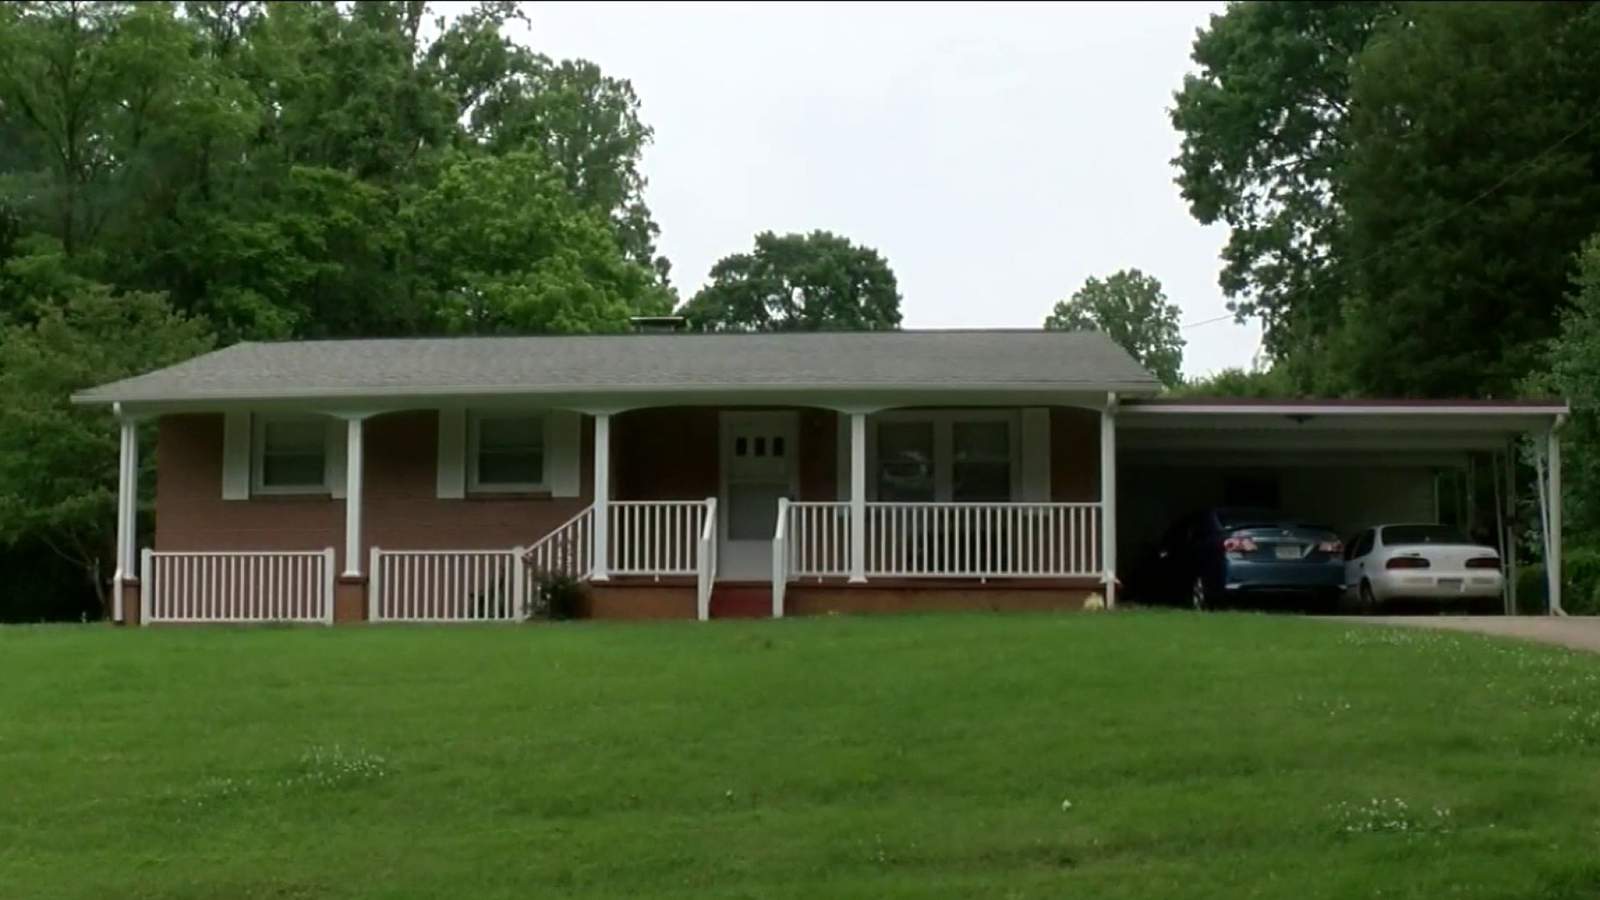 3 found dead inside Henry County home in suspected murder-suicide identified